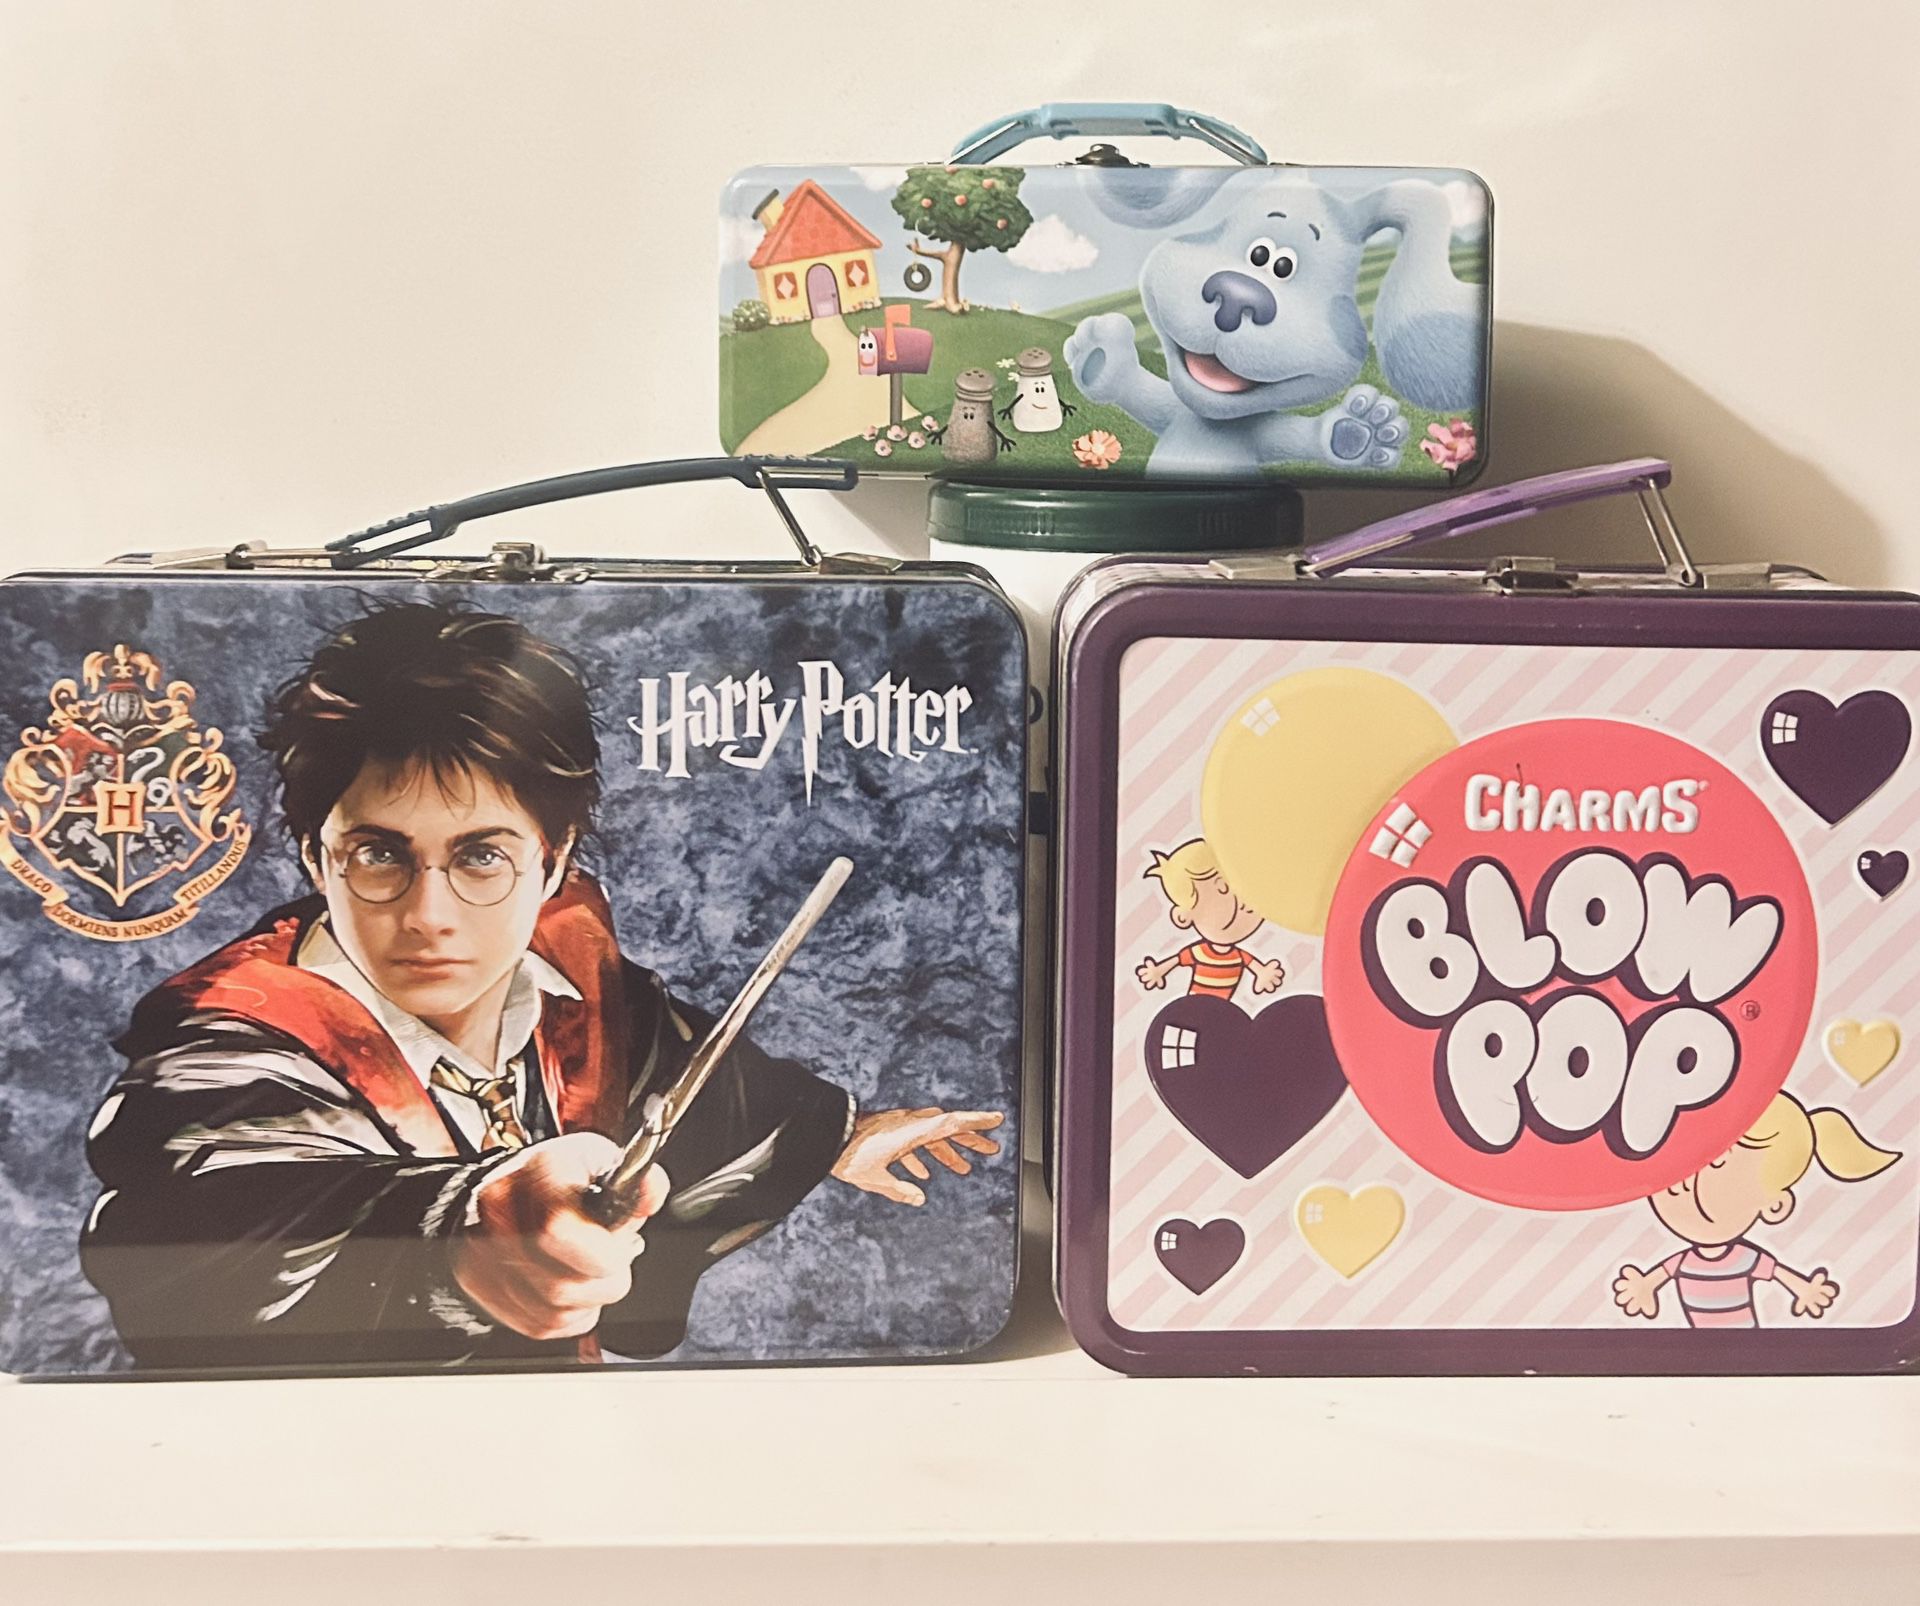 Tin lunch box combo  1. Harry Potter -, 2. Charms Blow POP-,3. Blues Clues-All With c